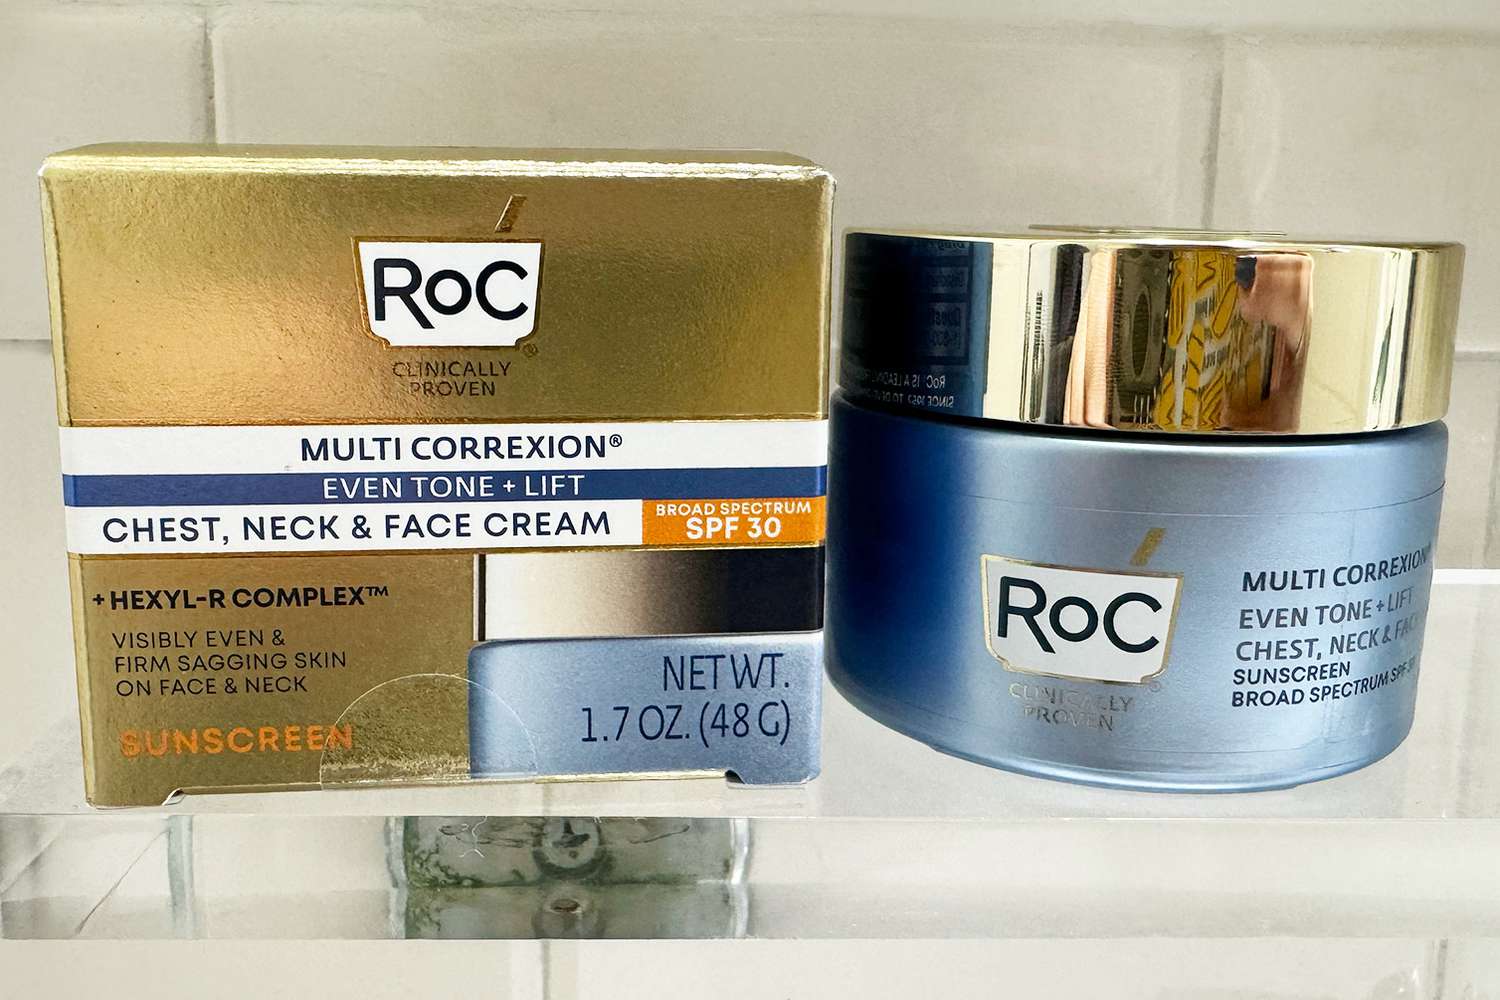 A jar of RoC Multi Correxion 5 in 1 Chest, Neck, and Face Moisturizer Cream with SPF 30 next to its box